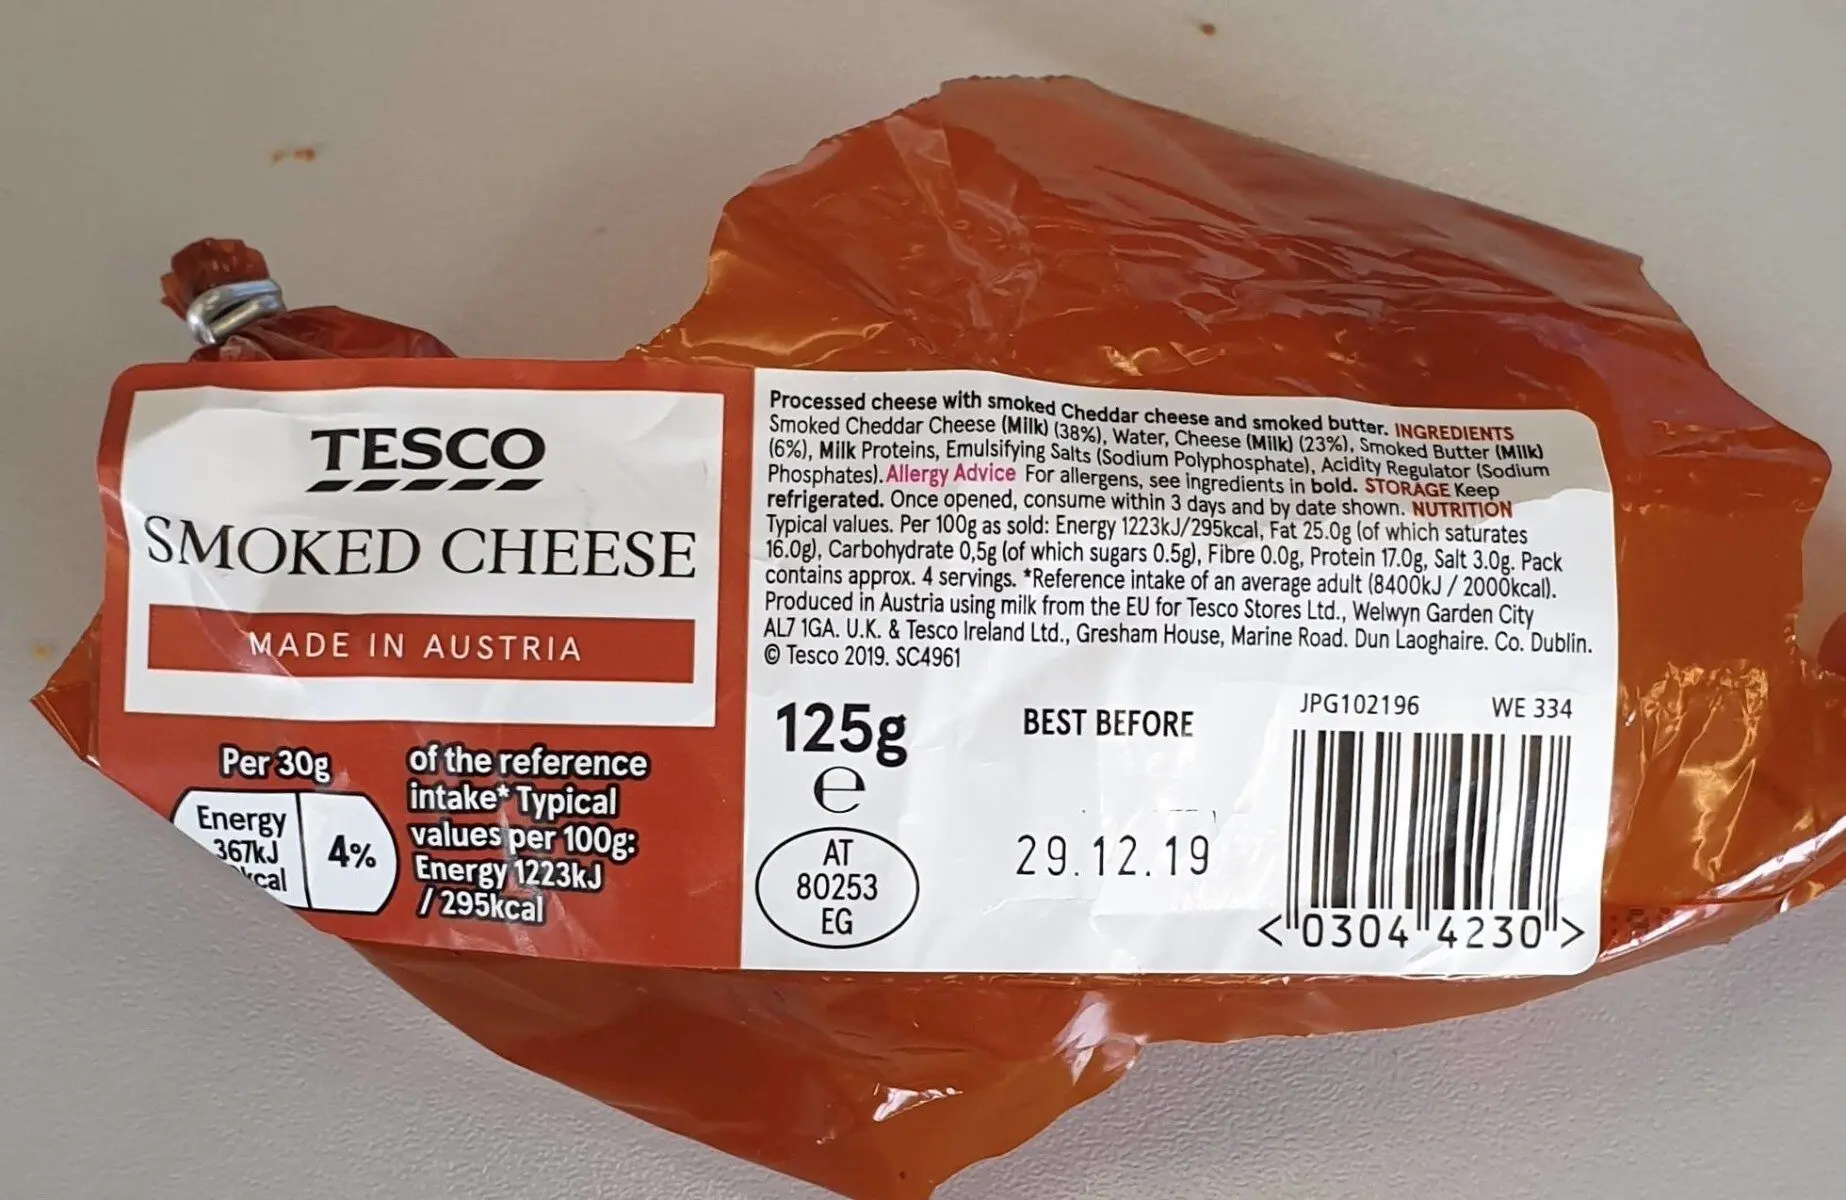 is tesco smoked cheese vegetarian - What ingredients are in smoked cheese